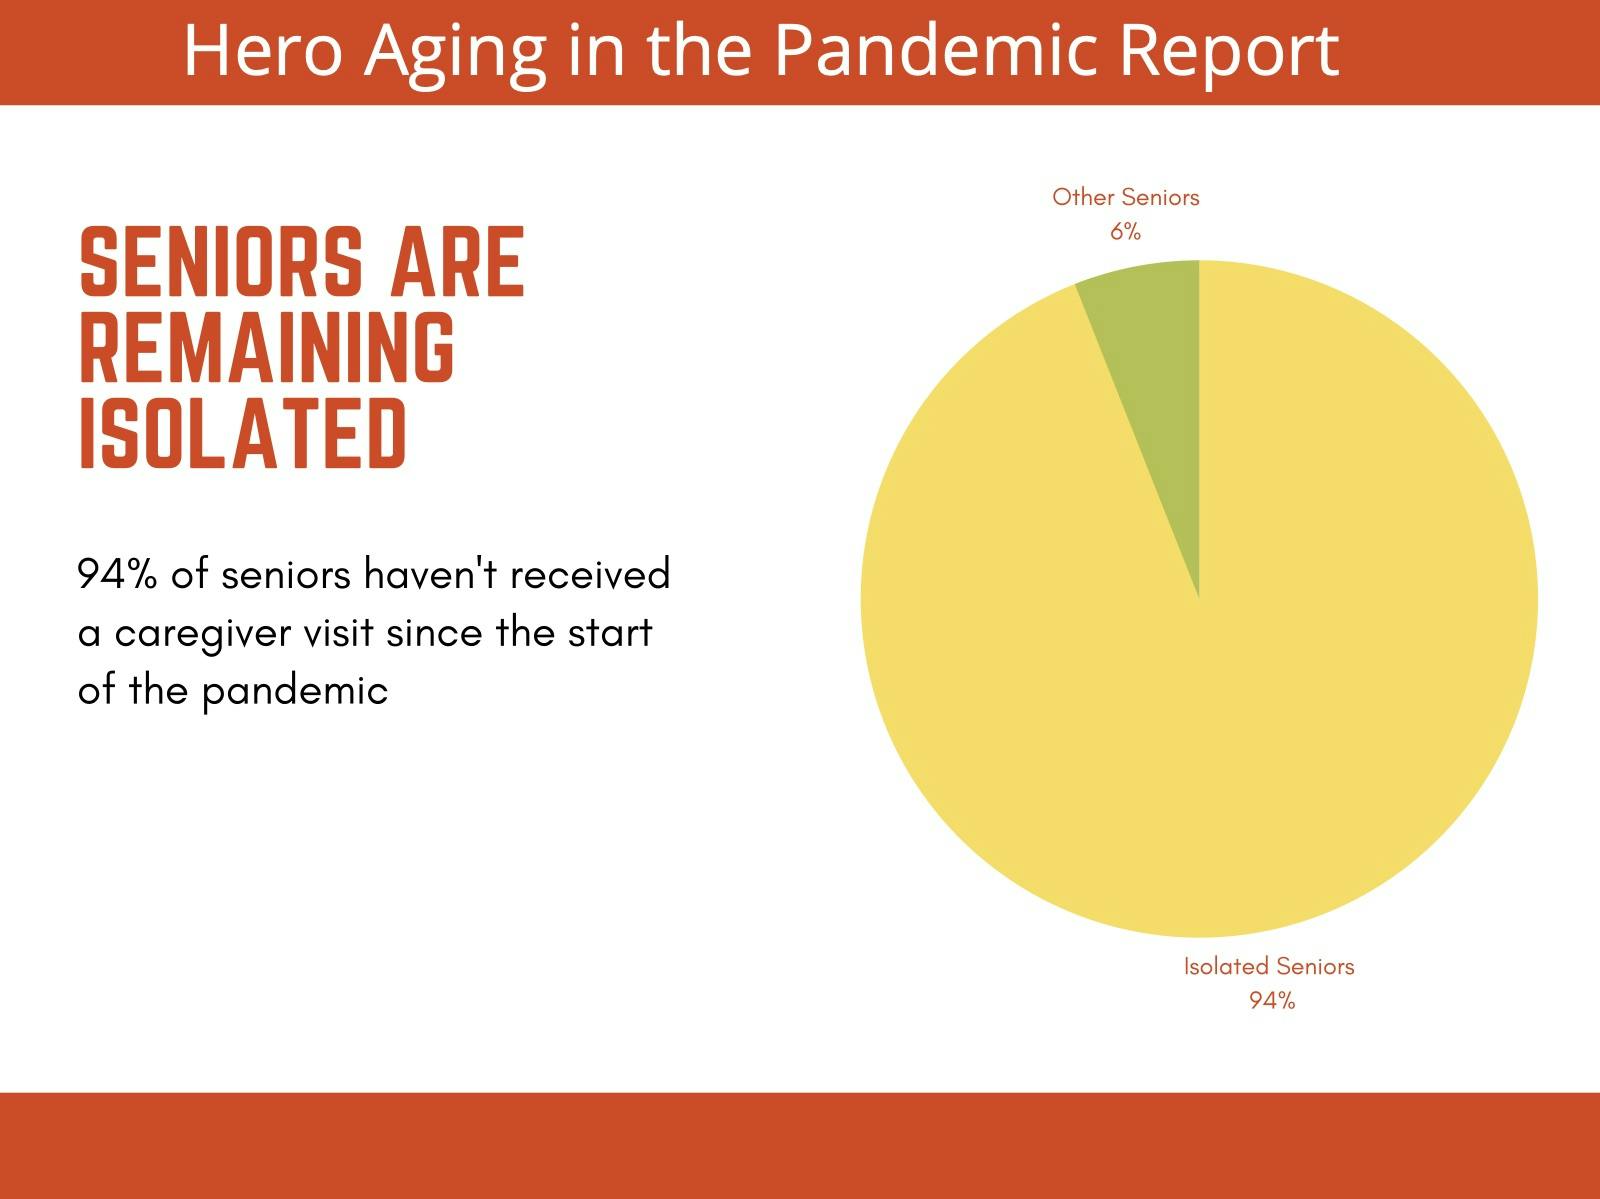 A pie chart showing that 94% of seniors haven't received a caregiver visit since the start of the pandemic.